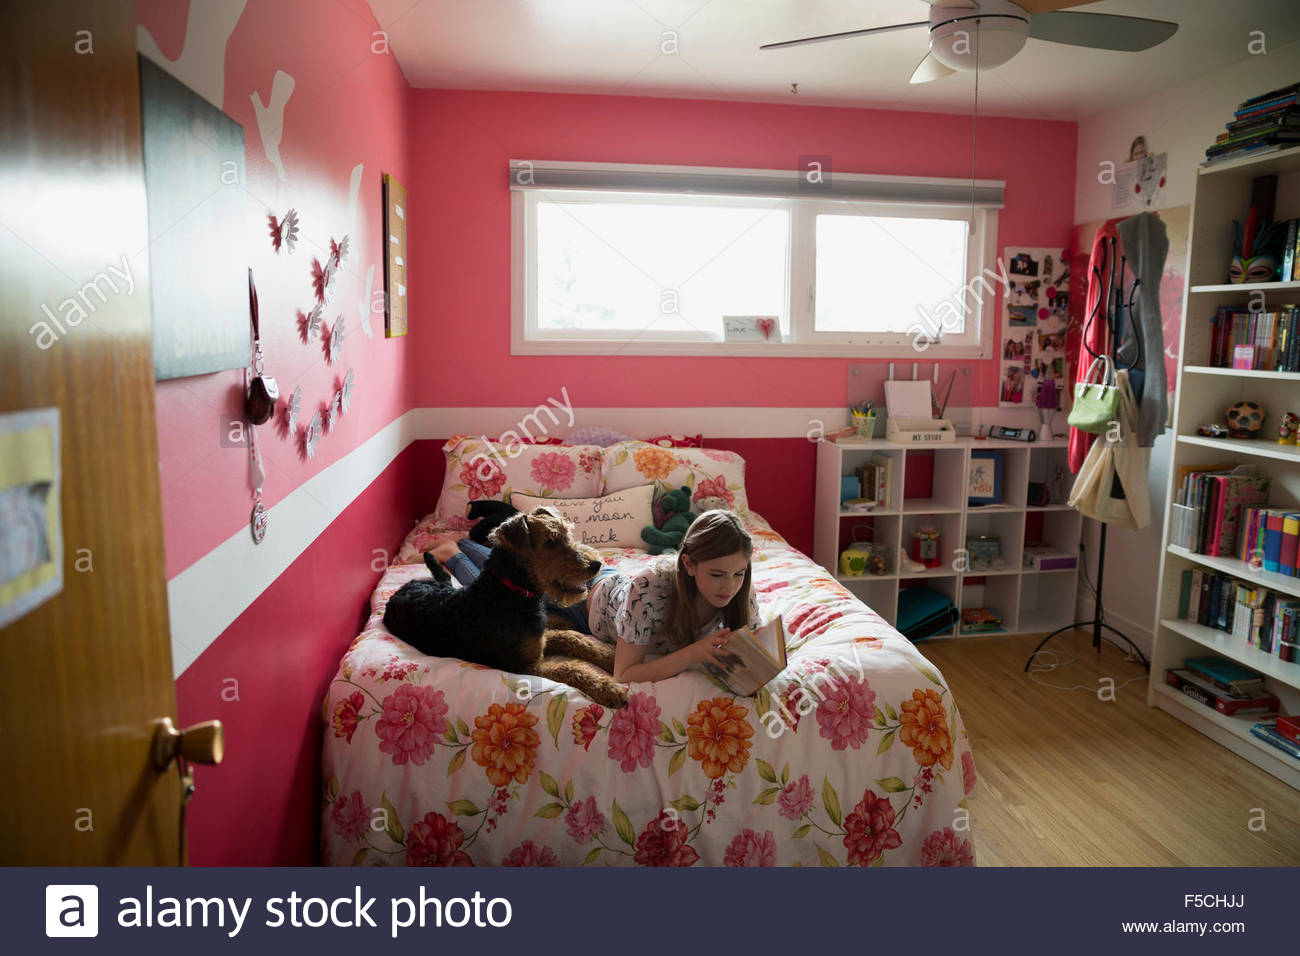 Dog laying next to girl reading book bed Stock Photo